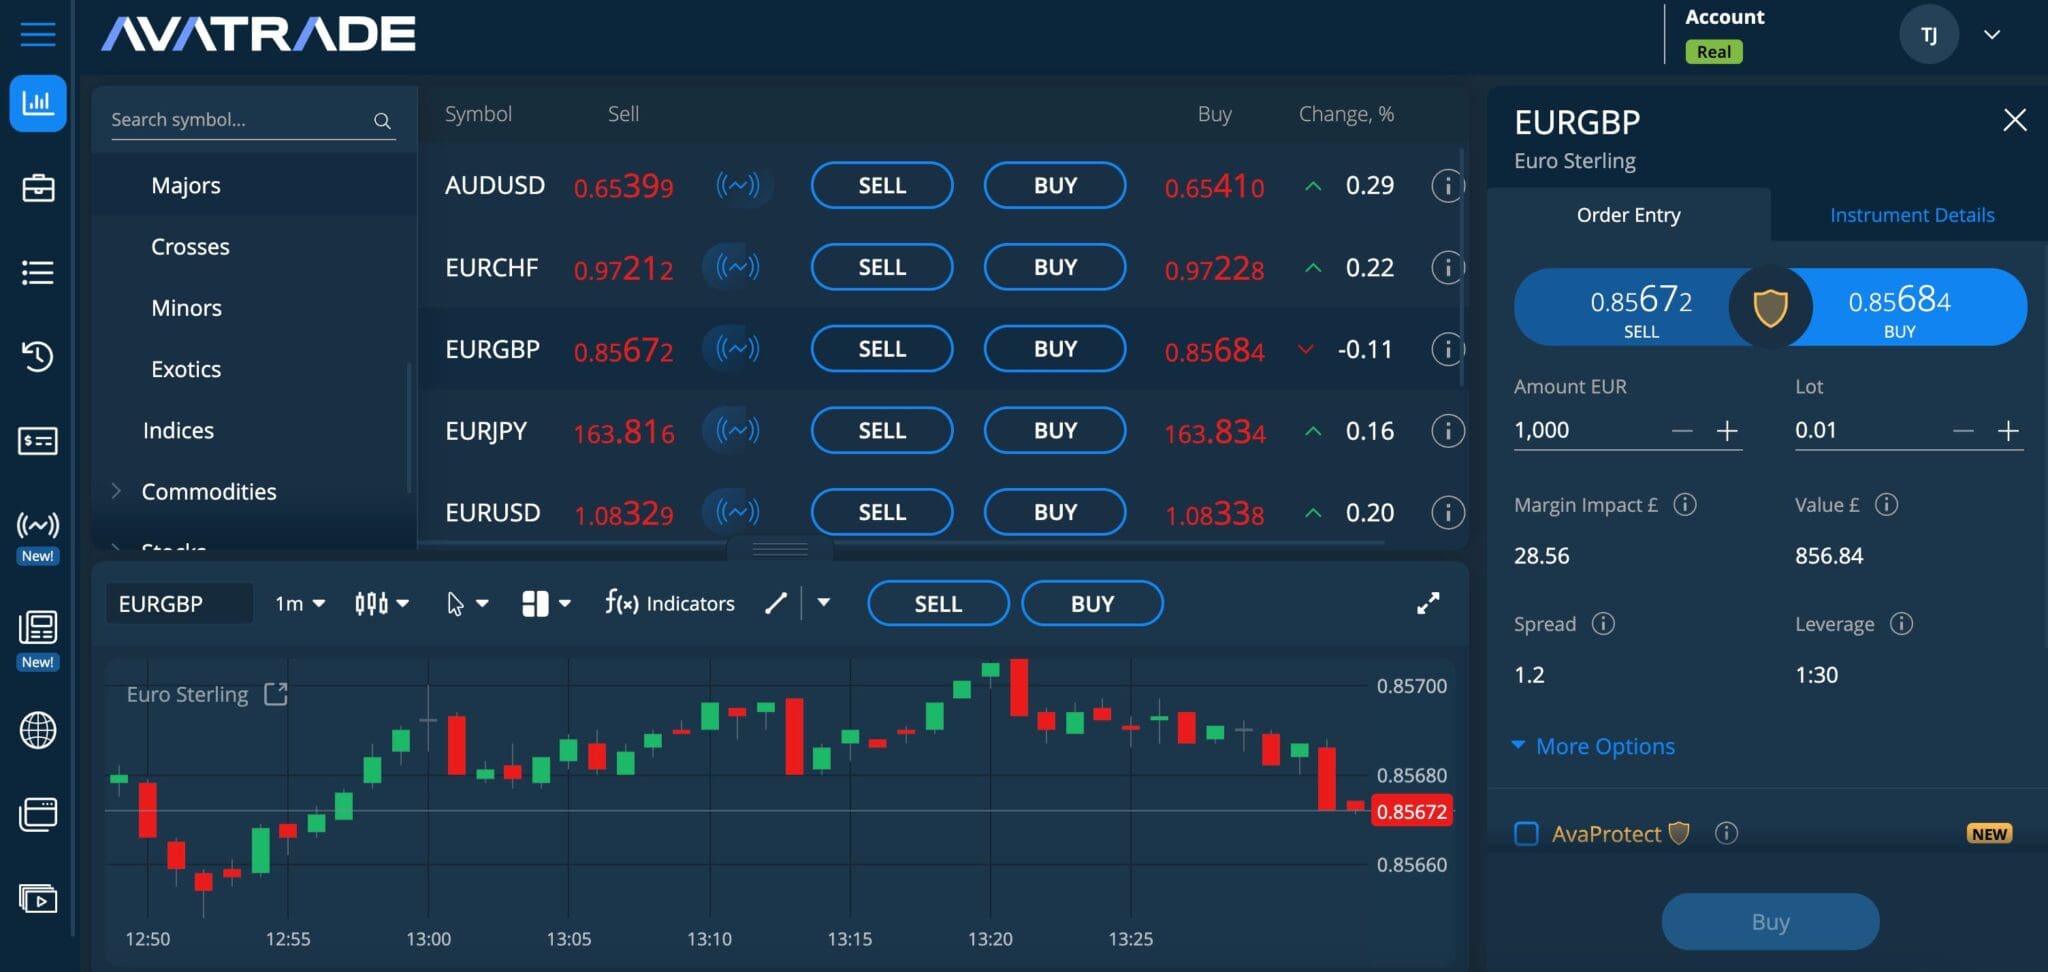 Short-term trading currency pairs on AvaTrade web platform